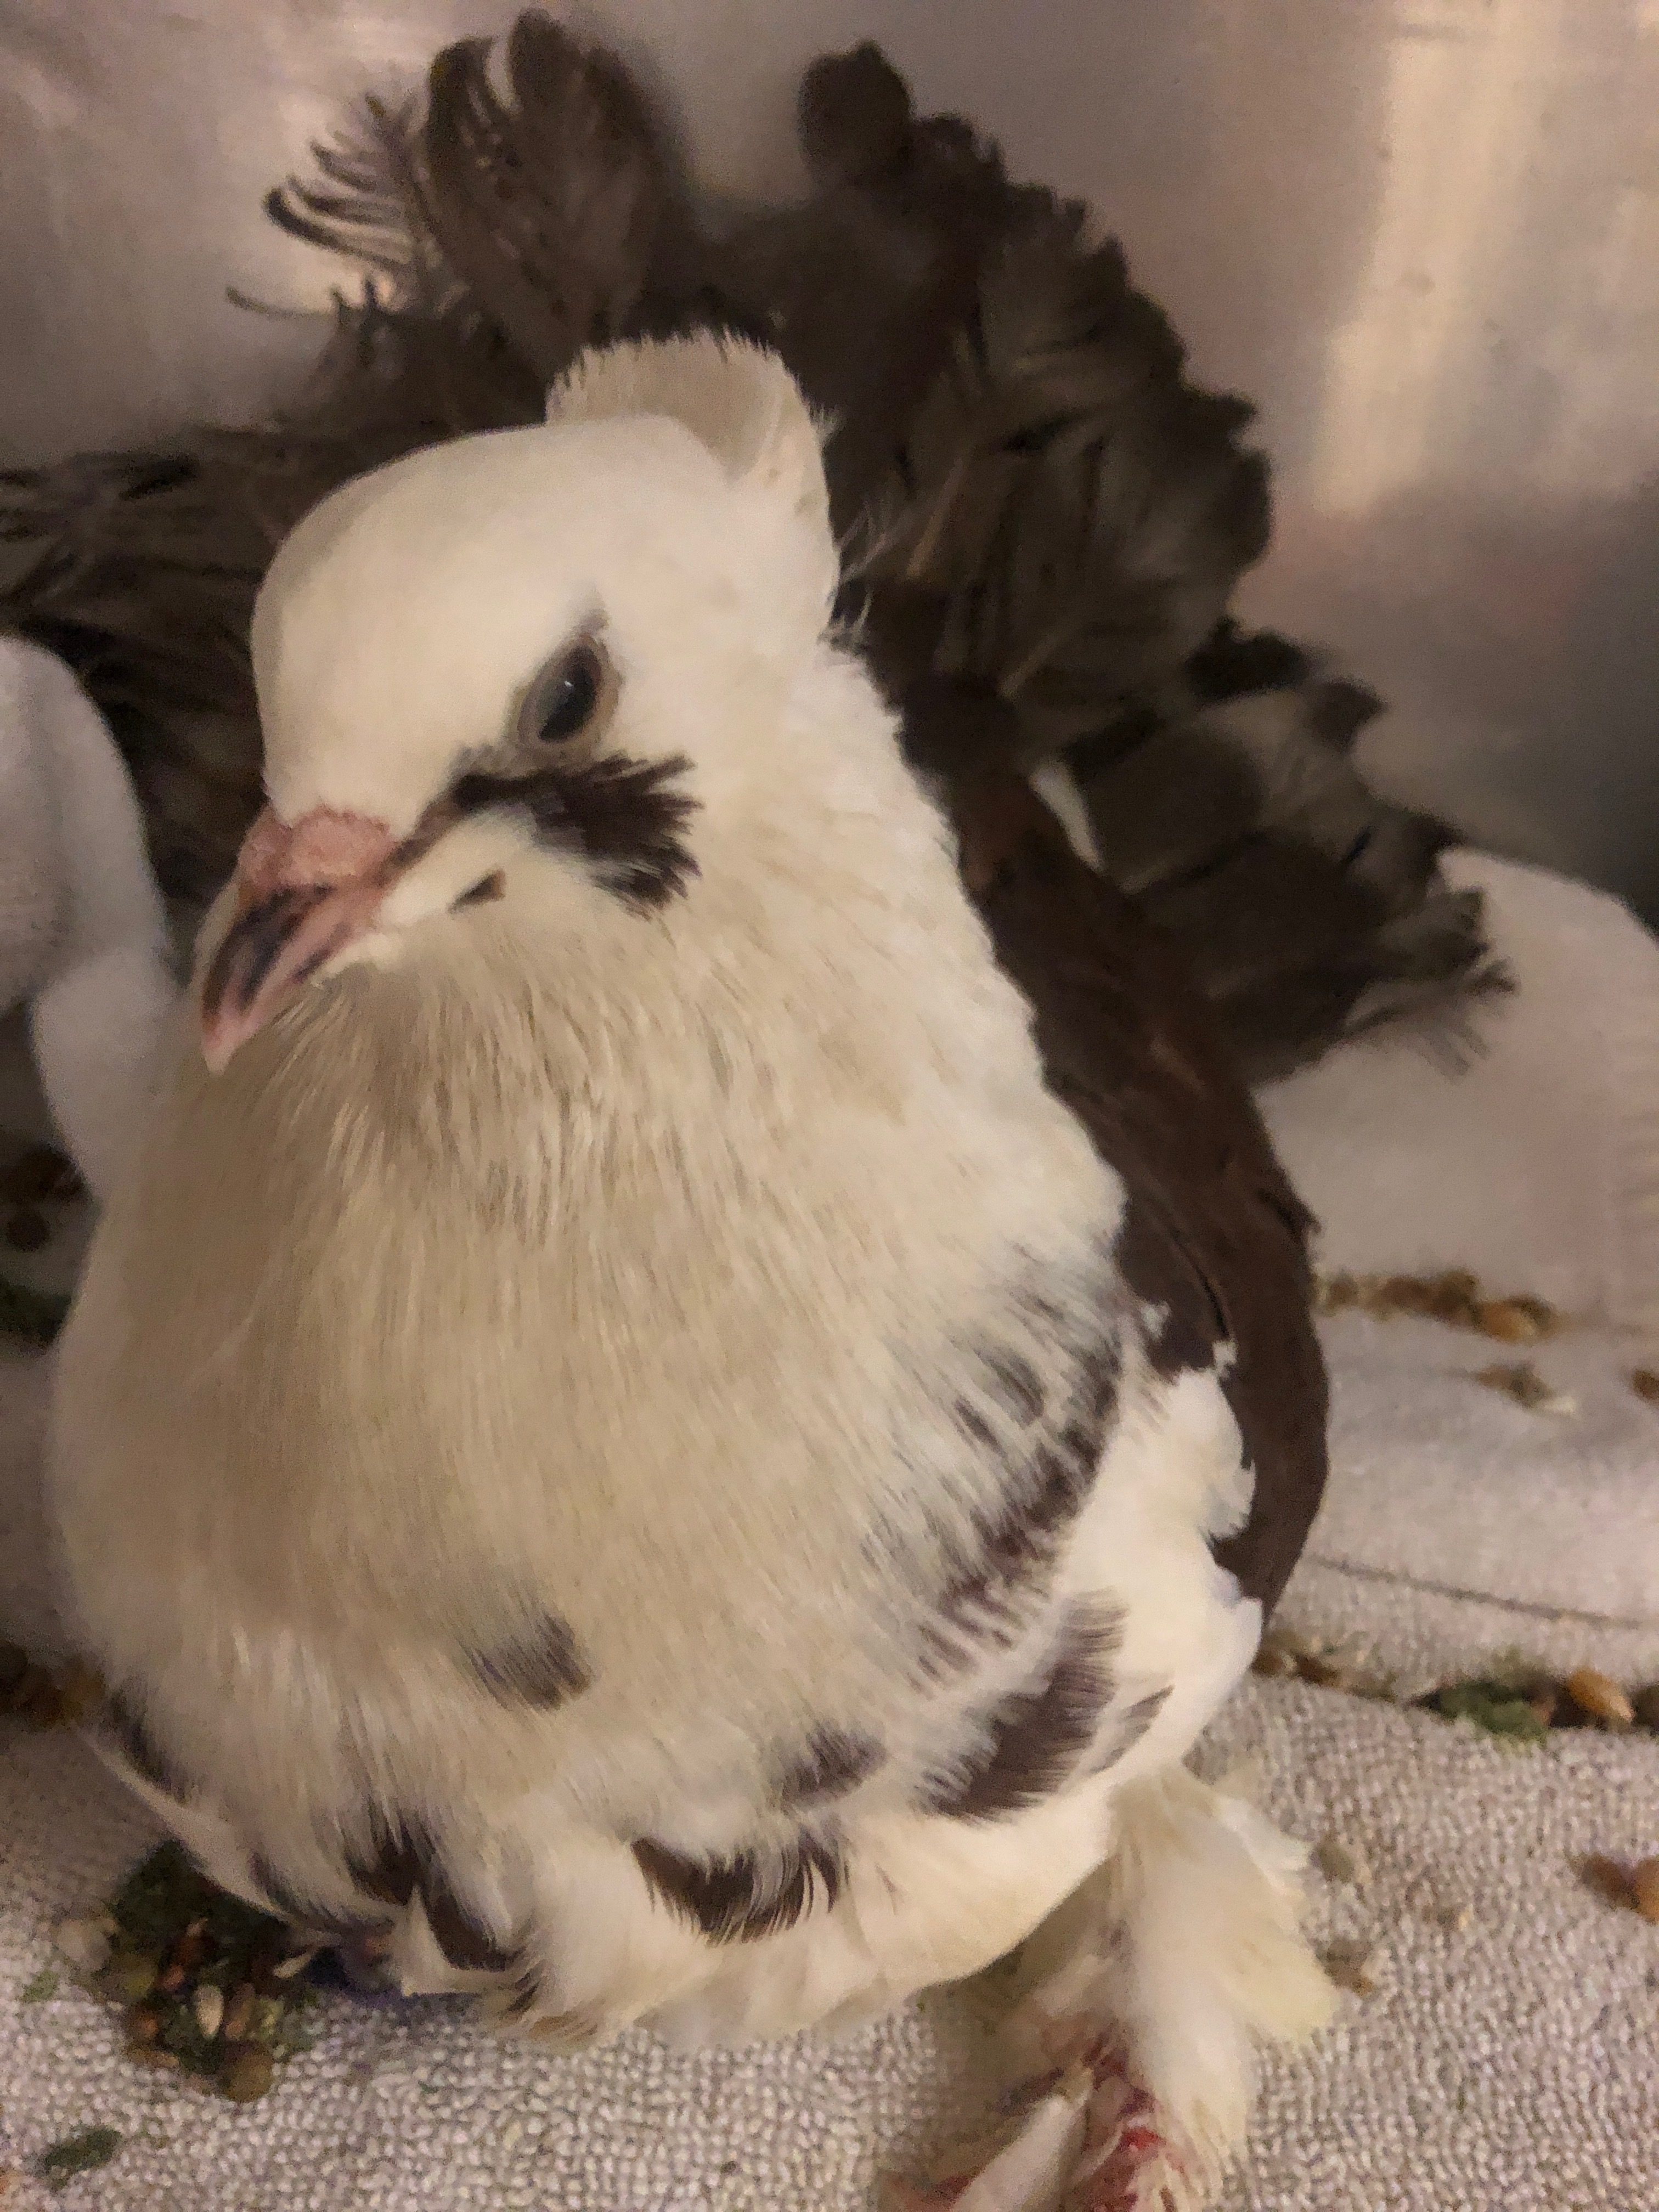 Fancy white & brown fantail pigeon in a vet hospital kennel